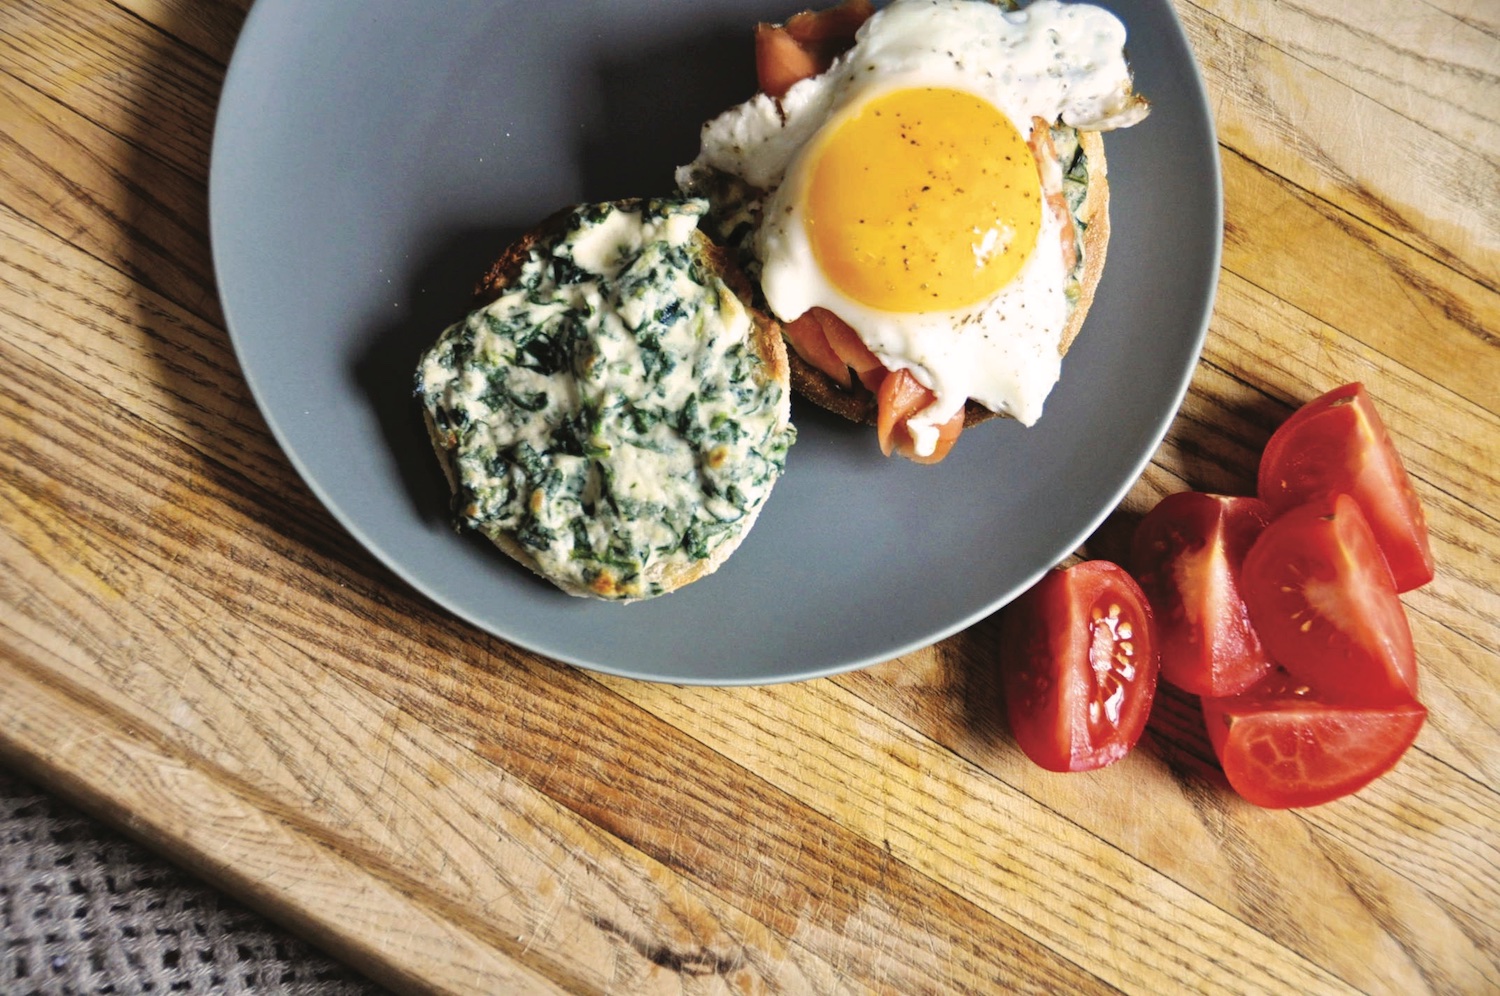 Kale and creamy spinach duo on english muffin